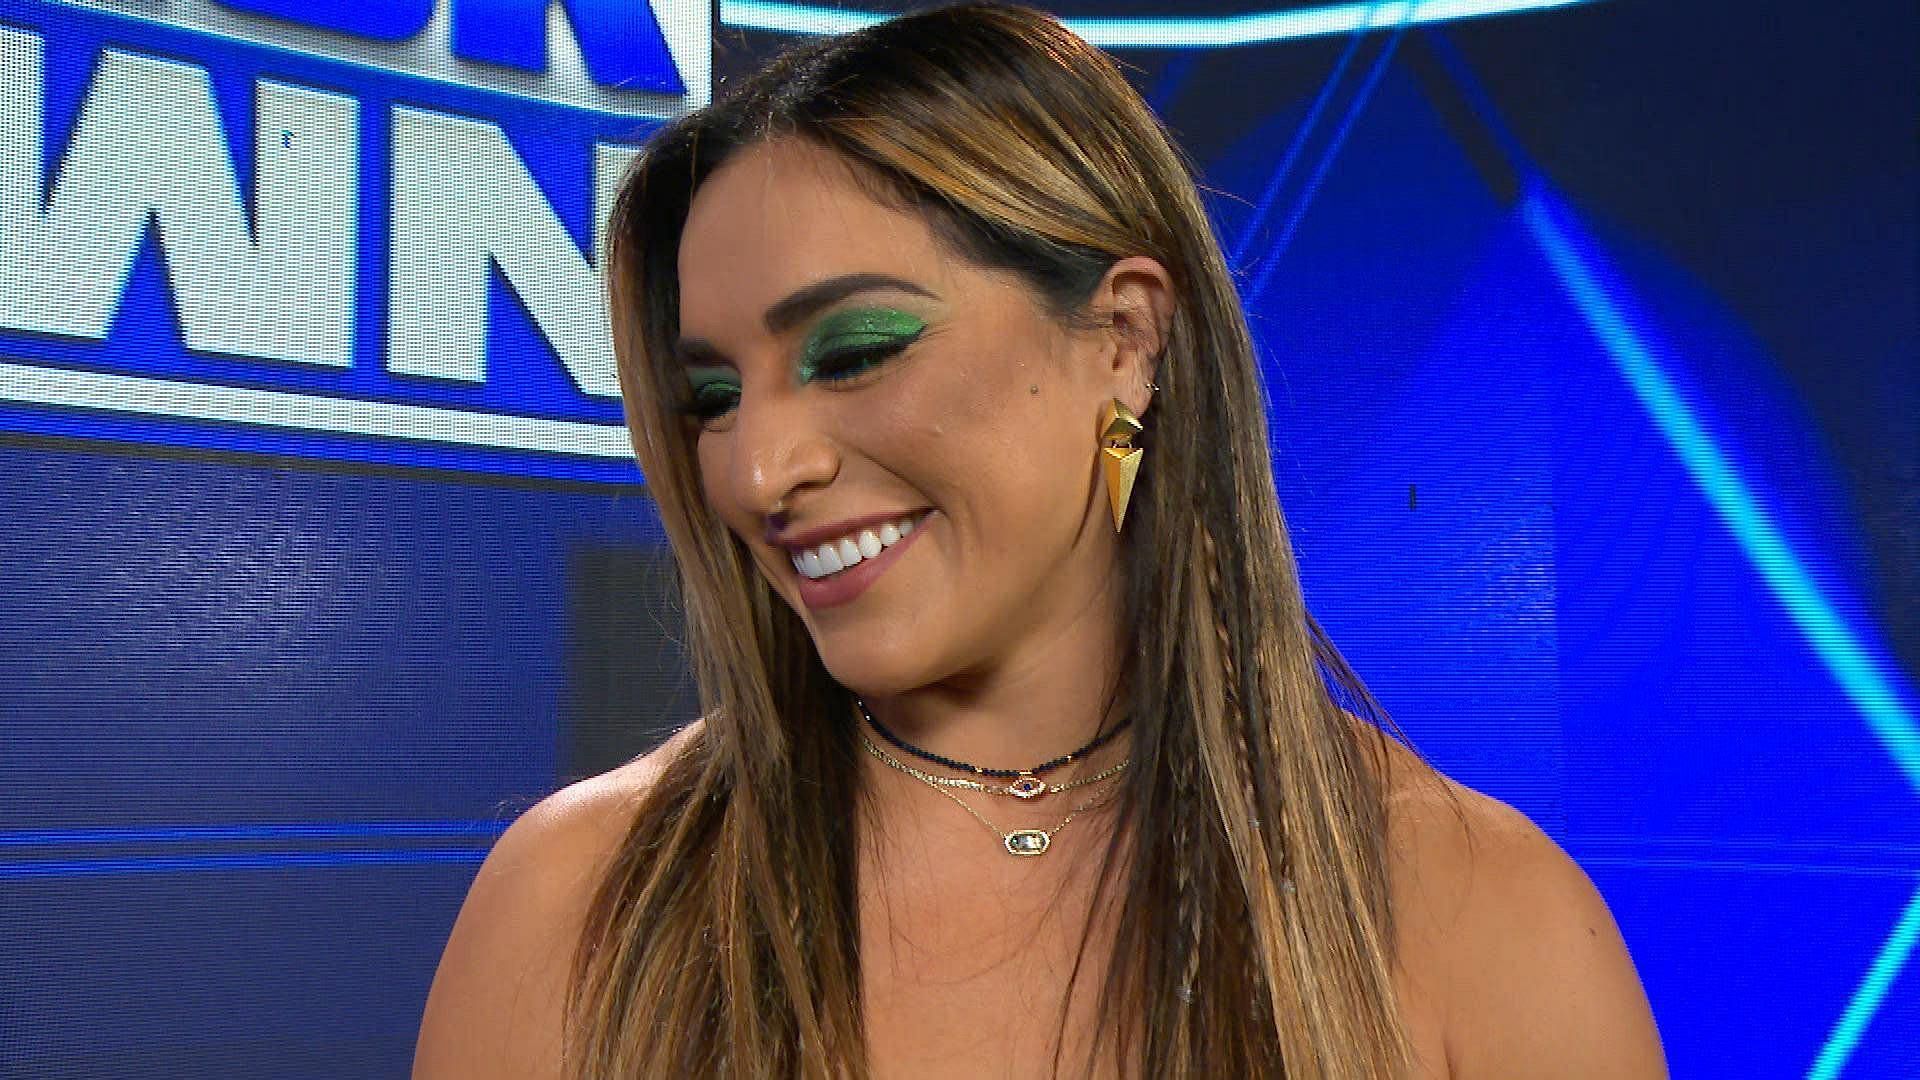 Raquel Rodriguez recently got promoted to the main roster